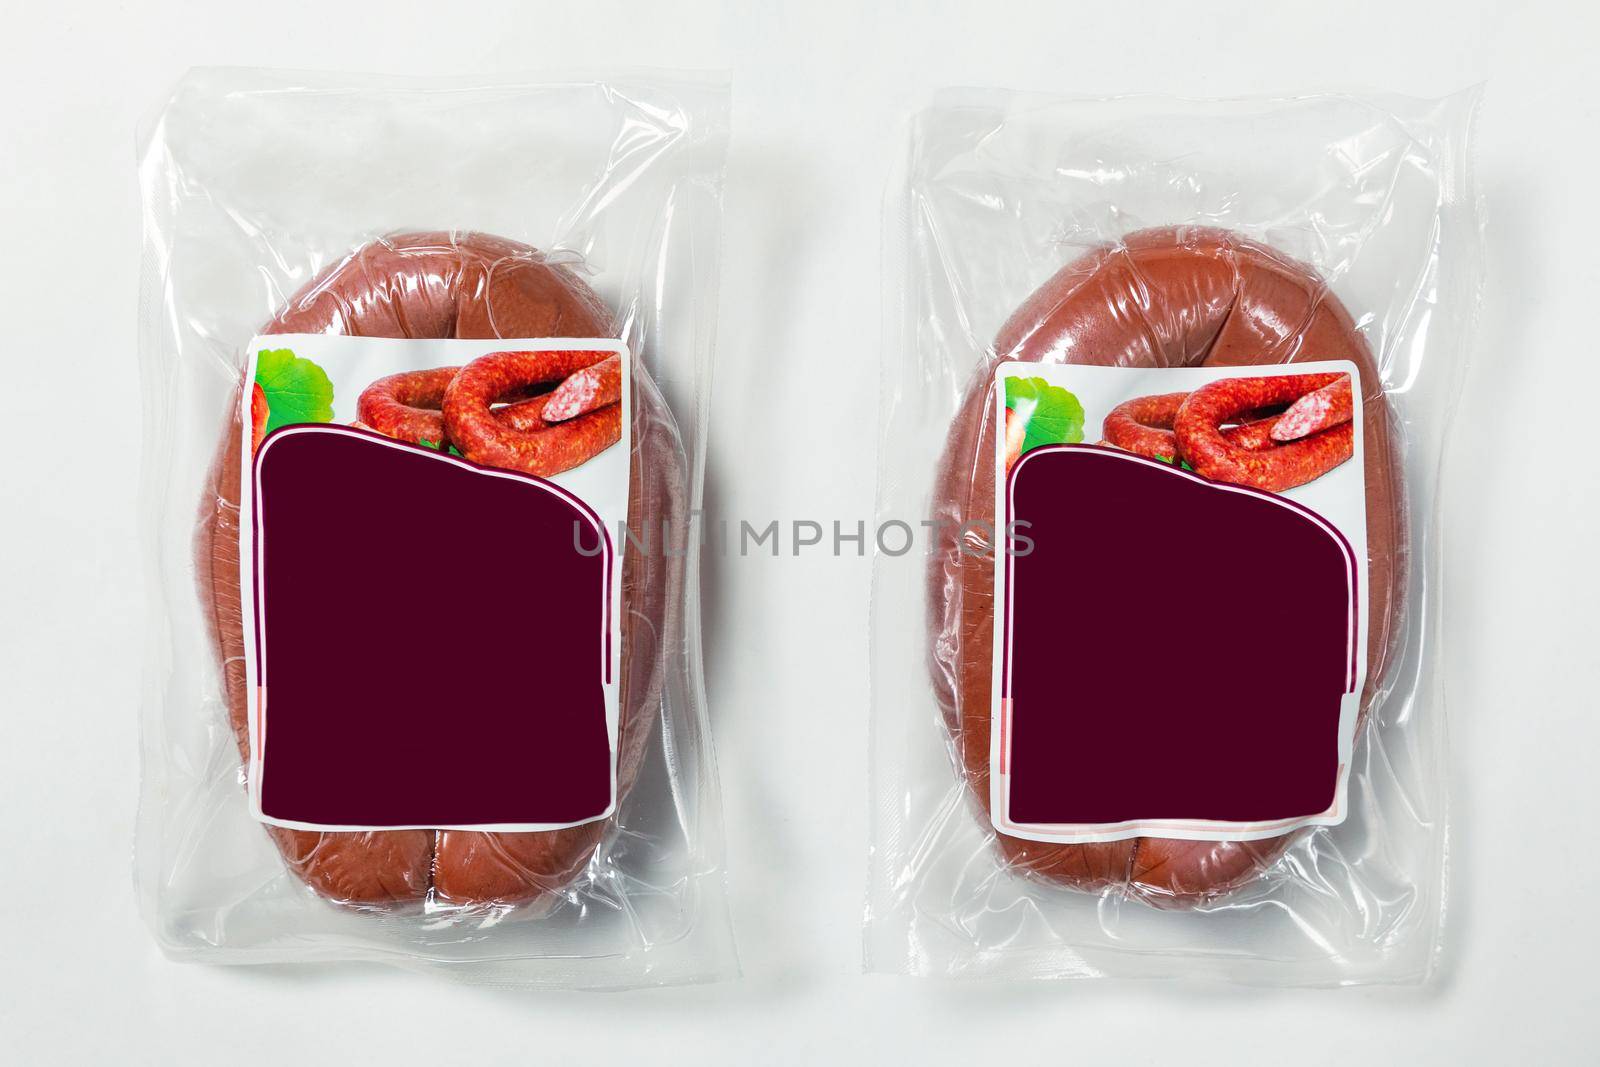 Sausage, salami product, ready for sale on the white background